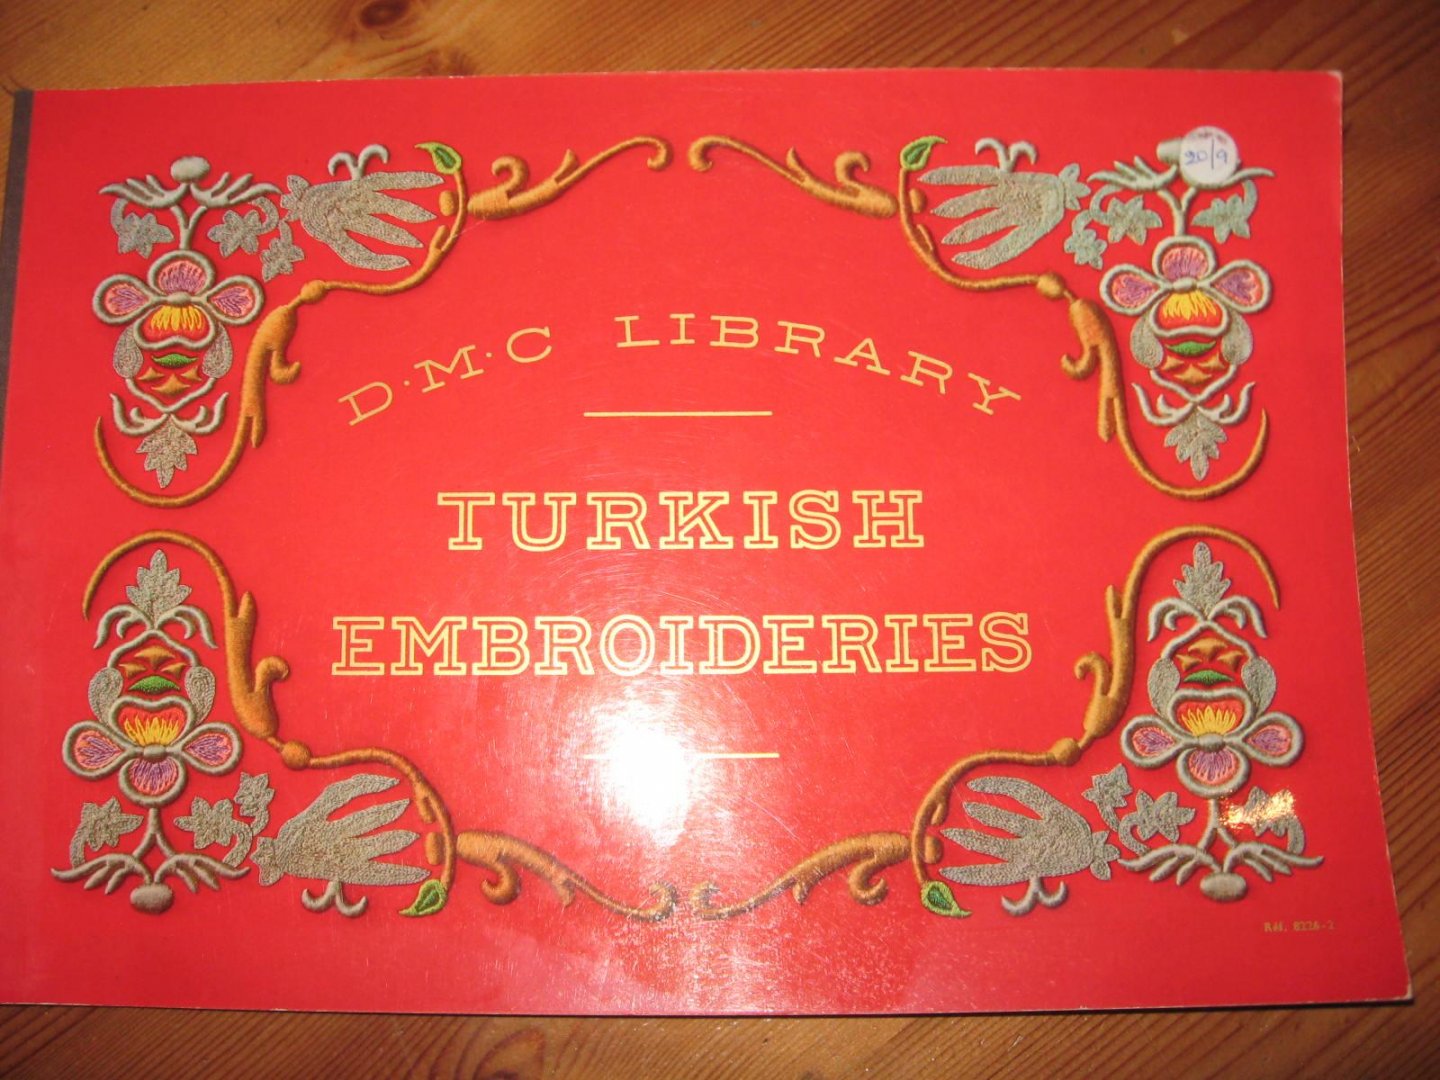 D. M. C. LIBRARY - Turkish Embroideries